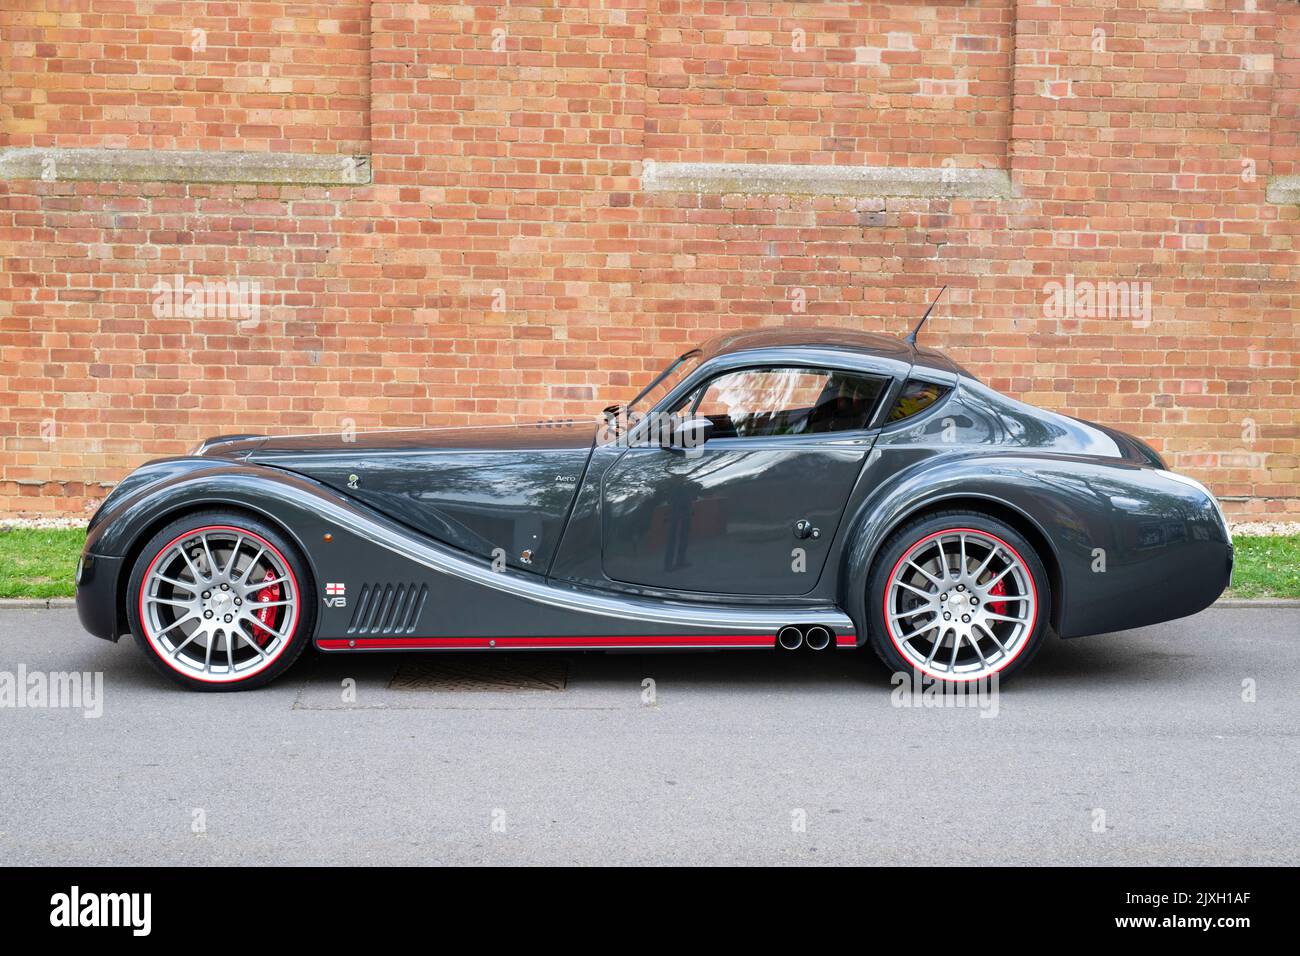 2014 Morgan Aero 8 Coupe car at Bicester Heritage Centre spring sunday scramble event. Bicester, Oxfordshire, England Stock Photo